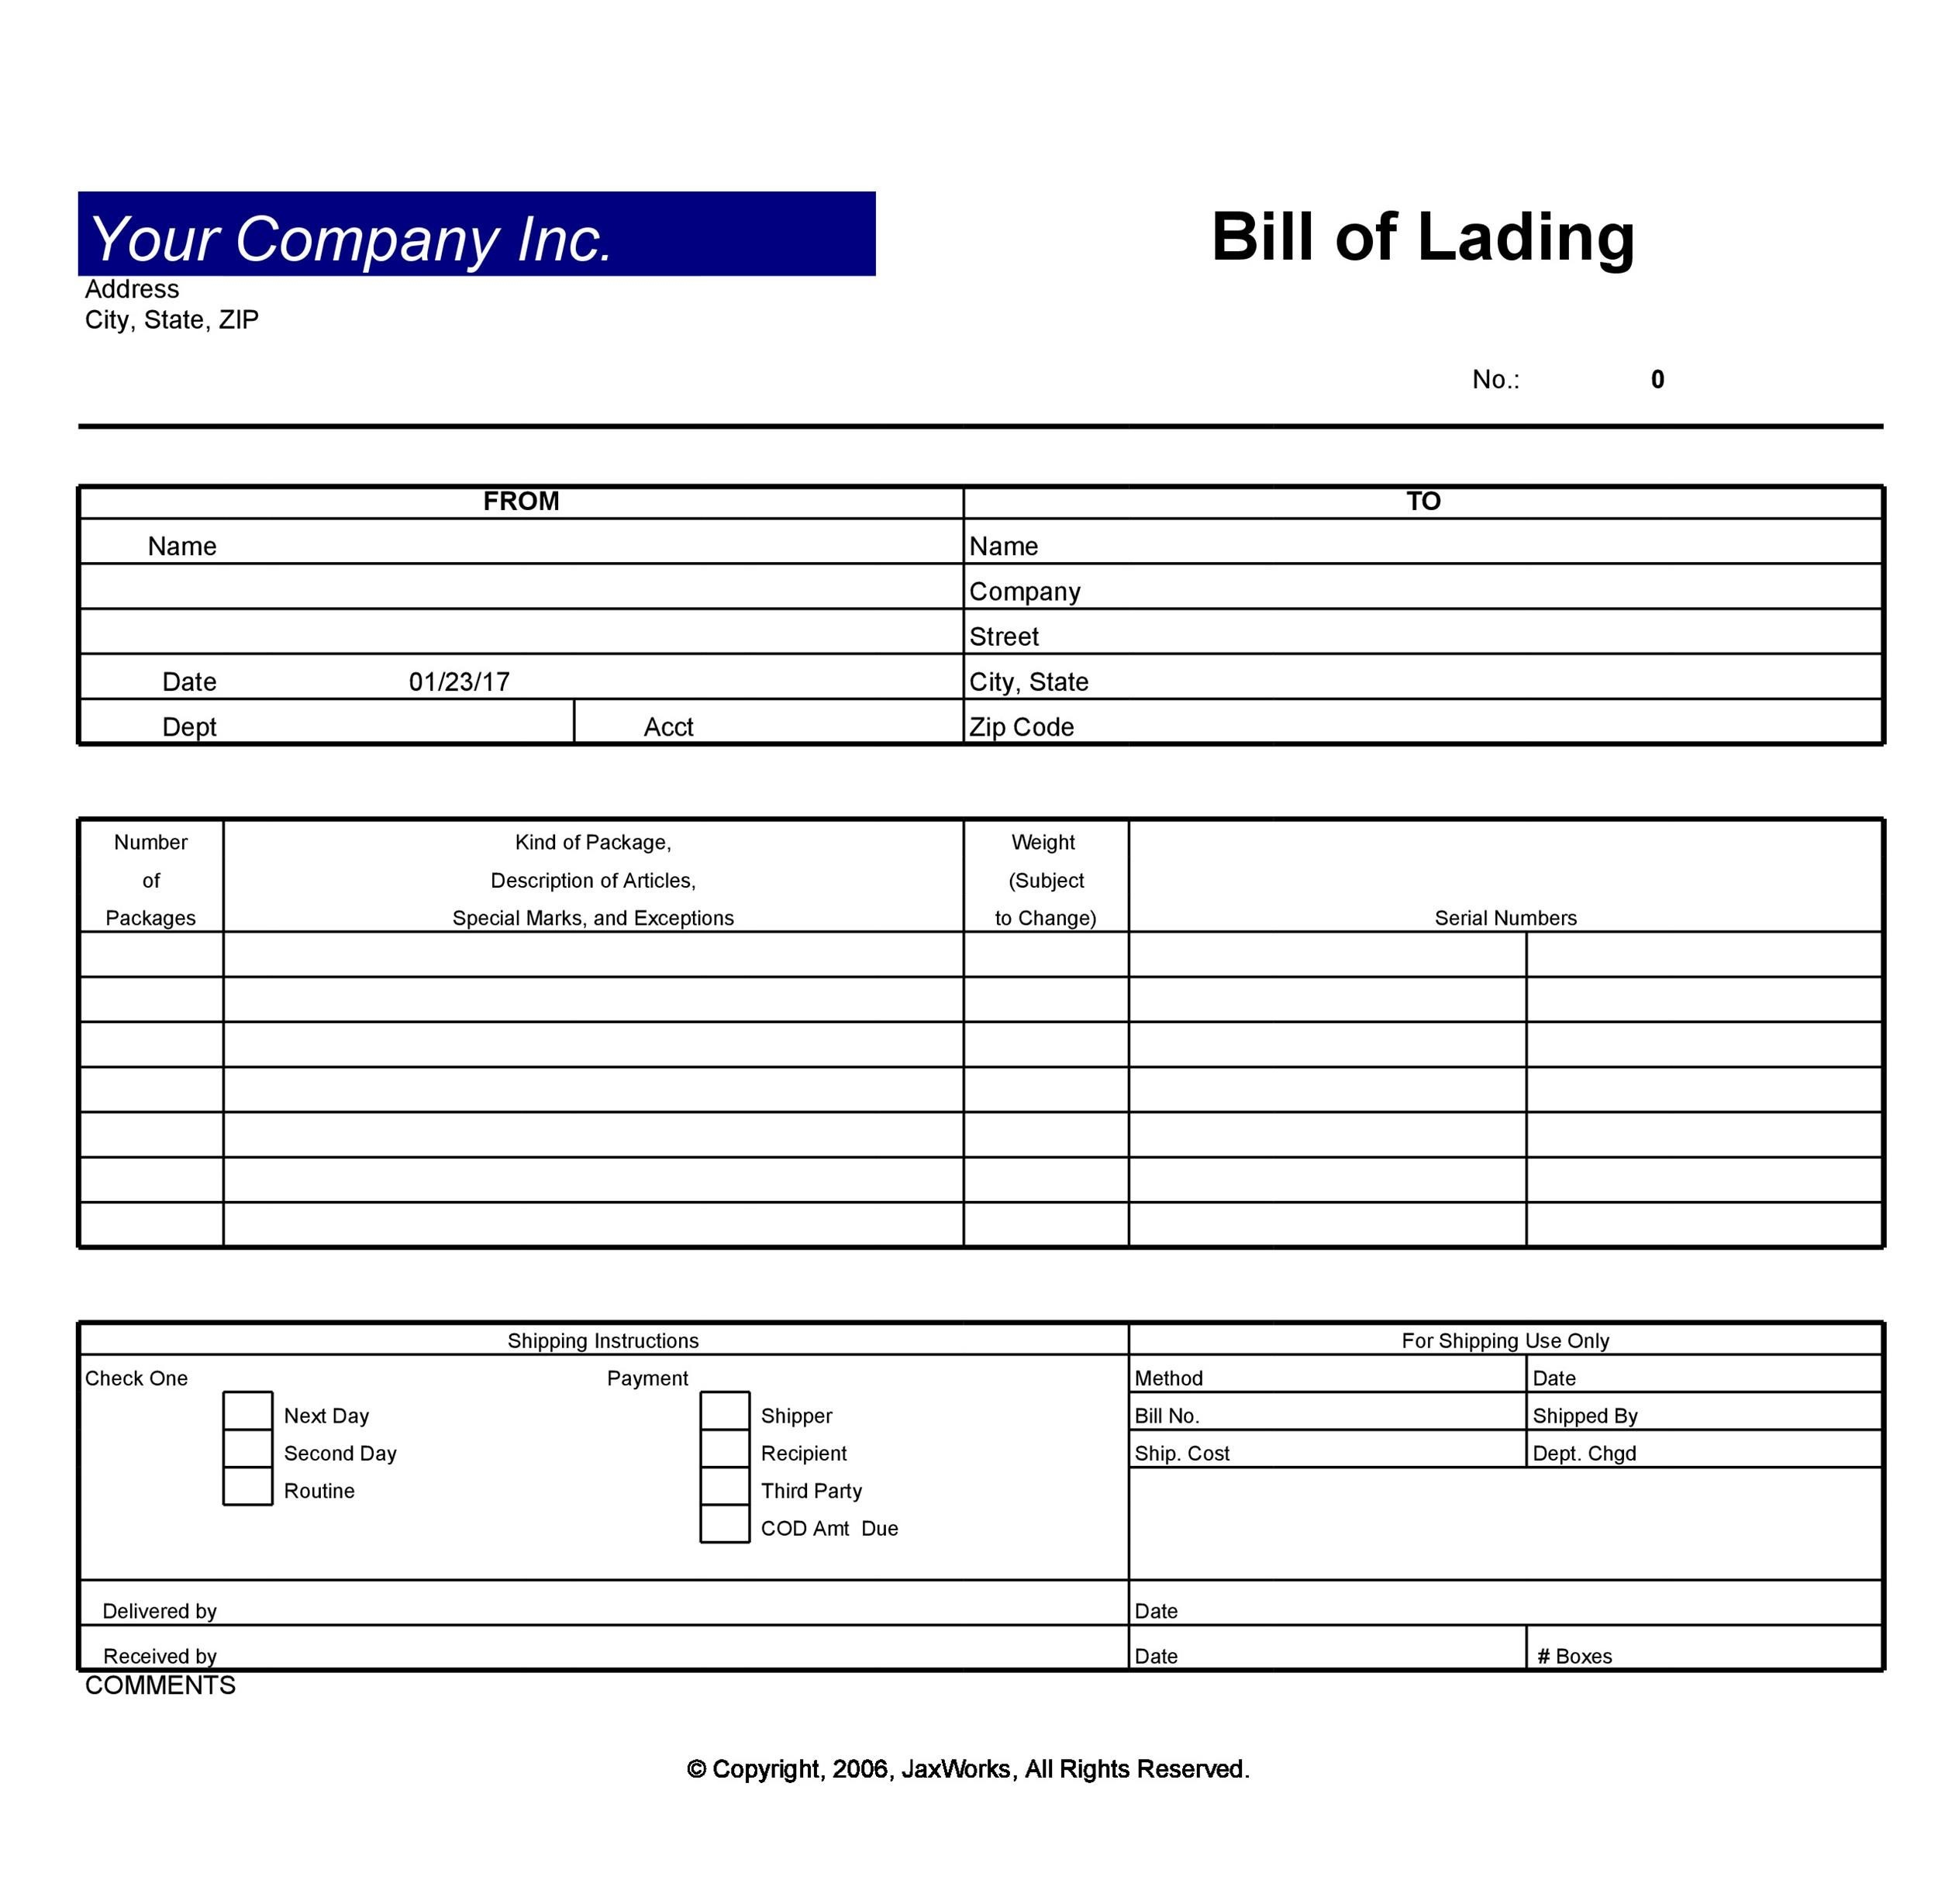 Straight Bill Of Lading Short Form Template Free Best of Document